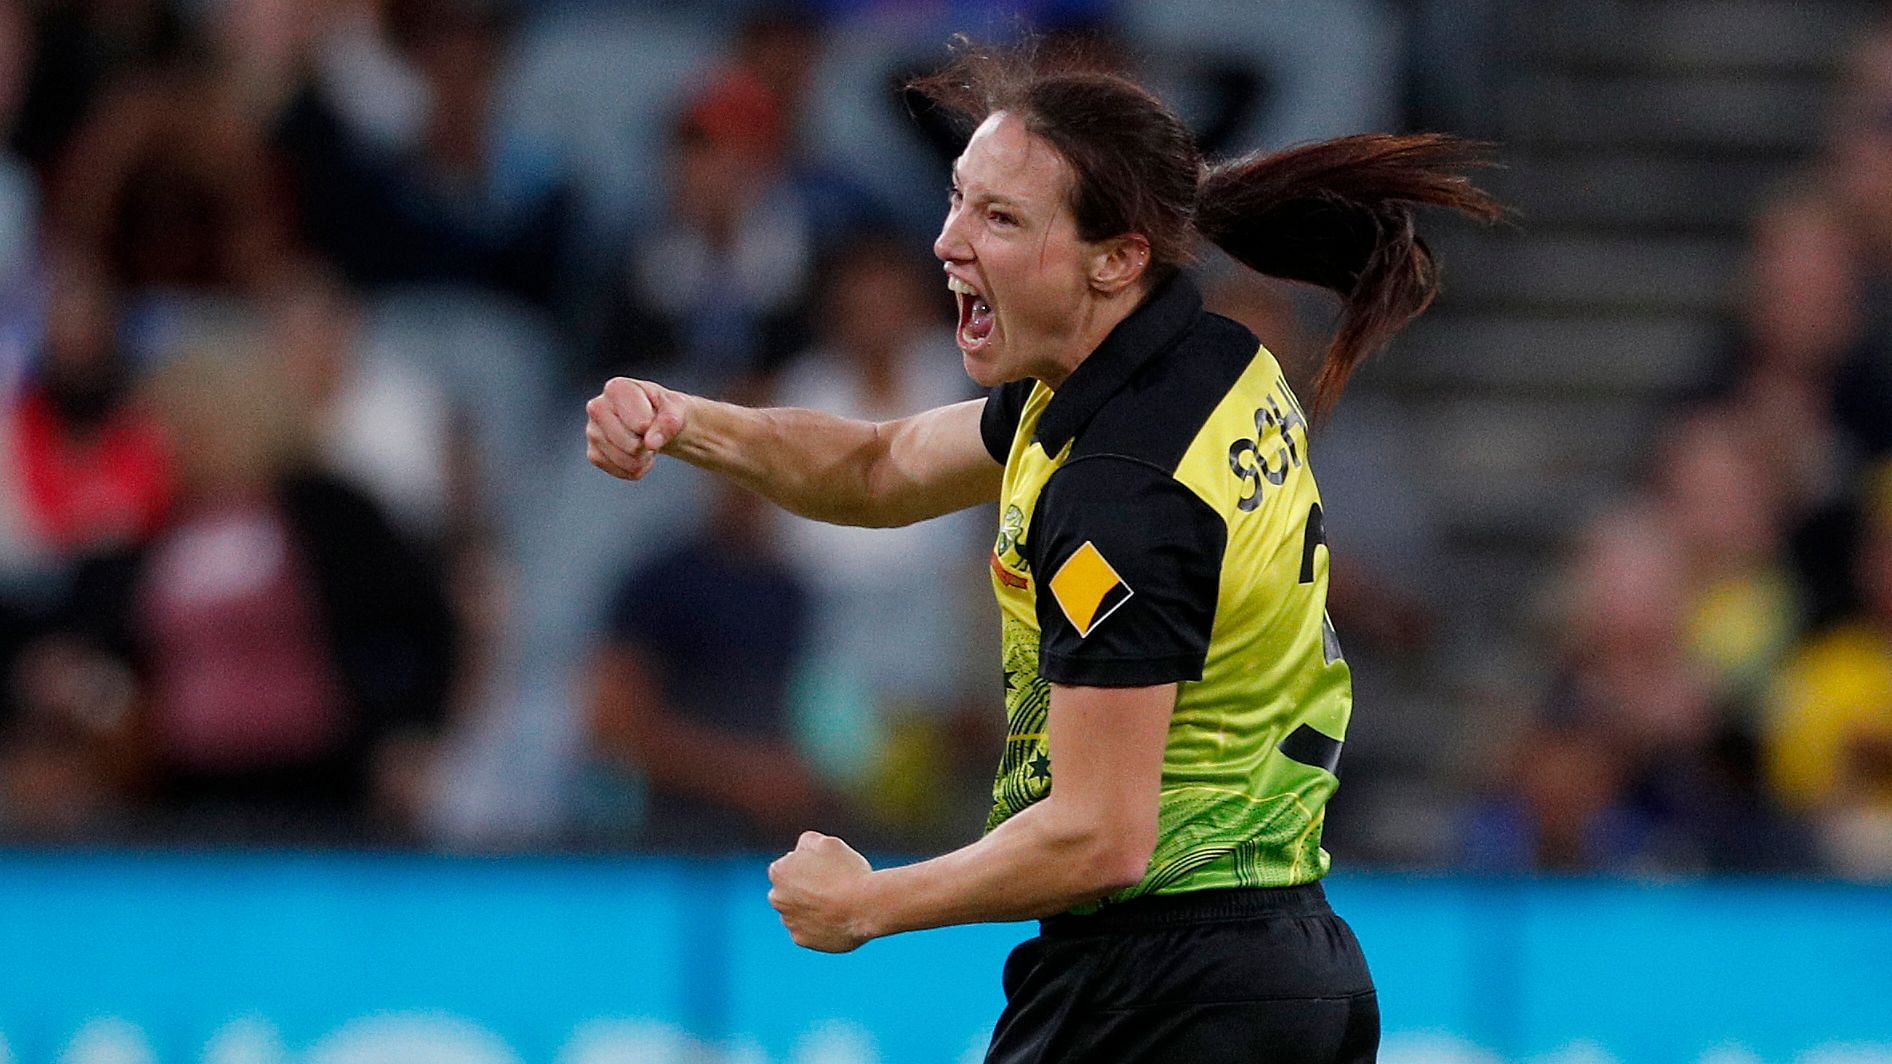 Megan Schutt starred with the ball for Australia by taking 4 wickets for 18 runs in her 4 overs.